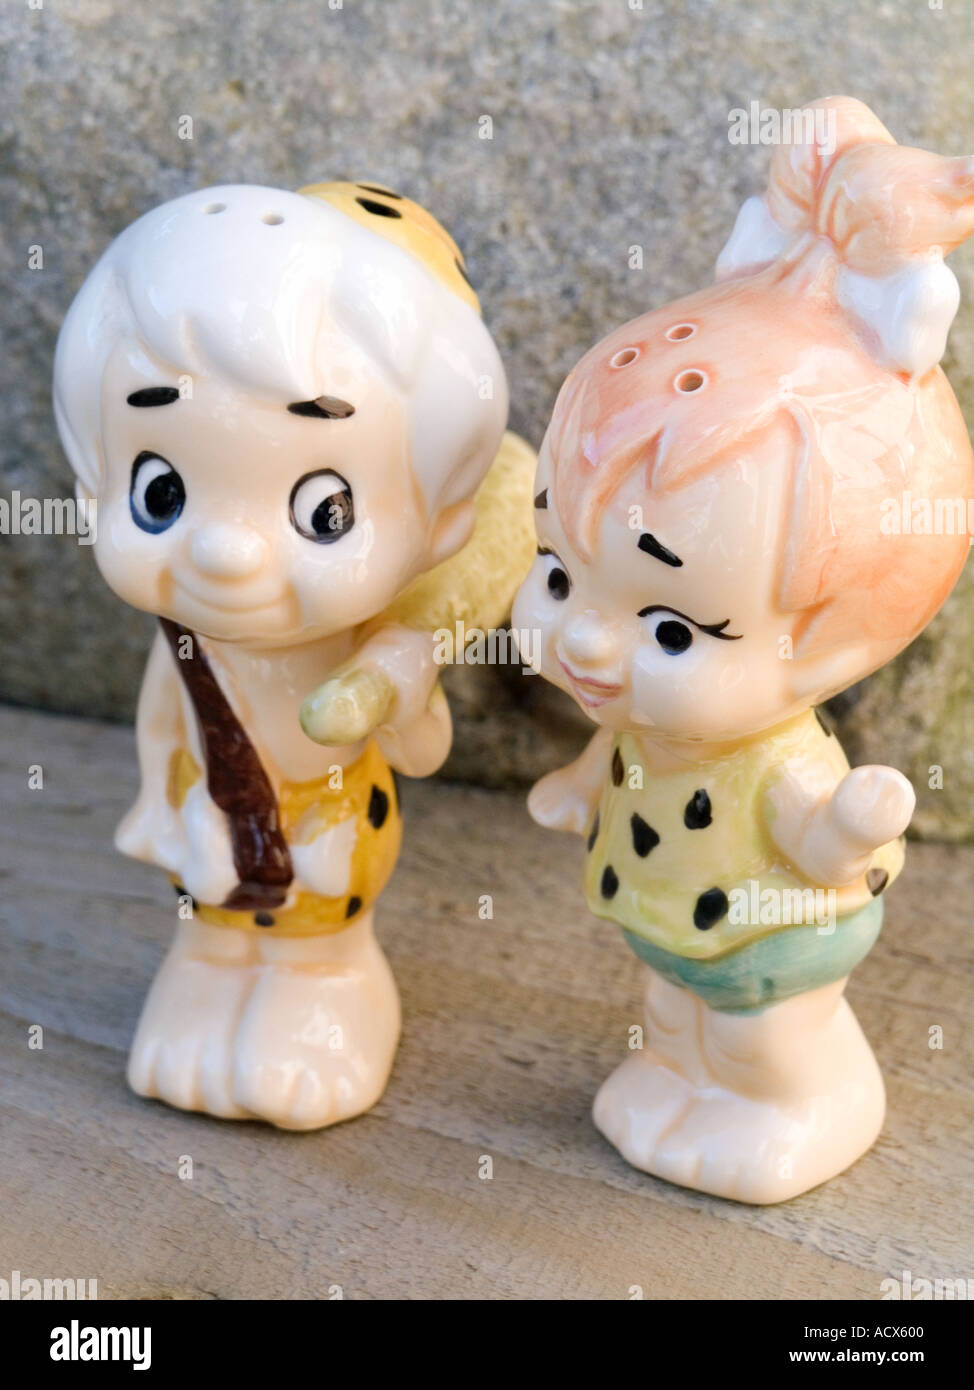 BETTY AND BARNIE RUBBLE SALT AND PEPPER POTS Stock Photo